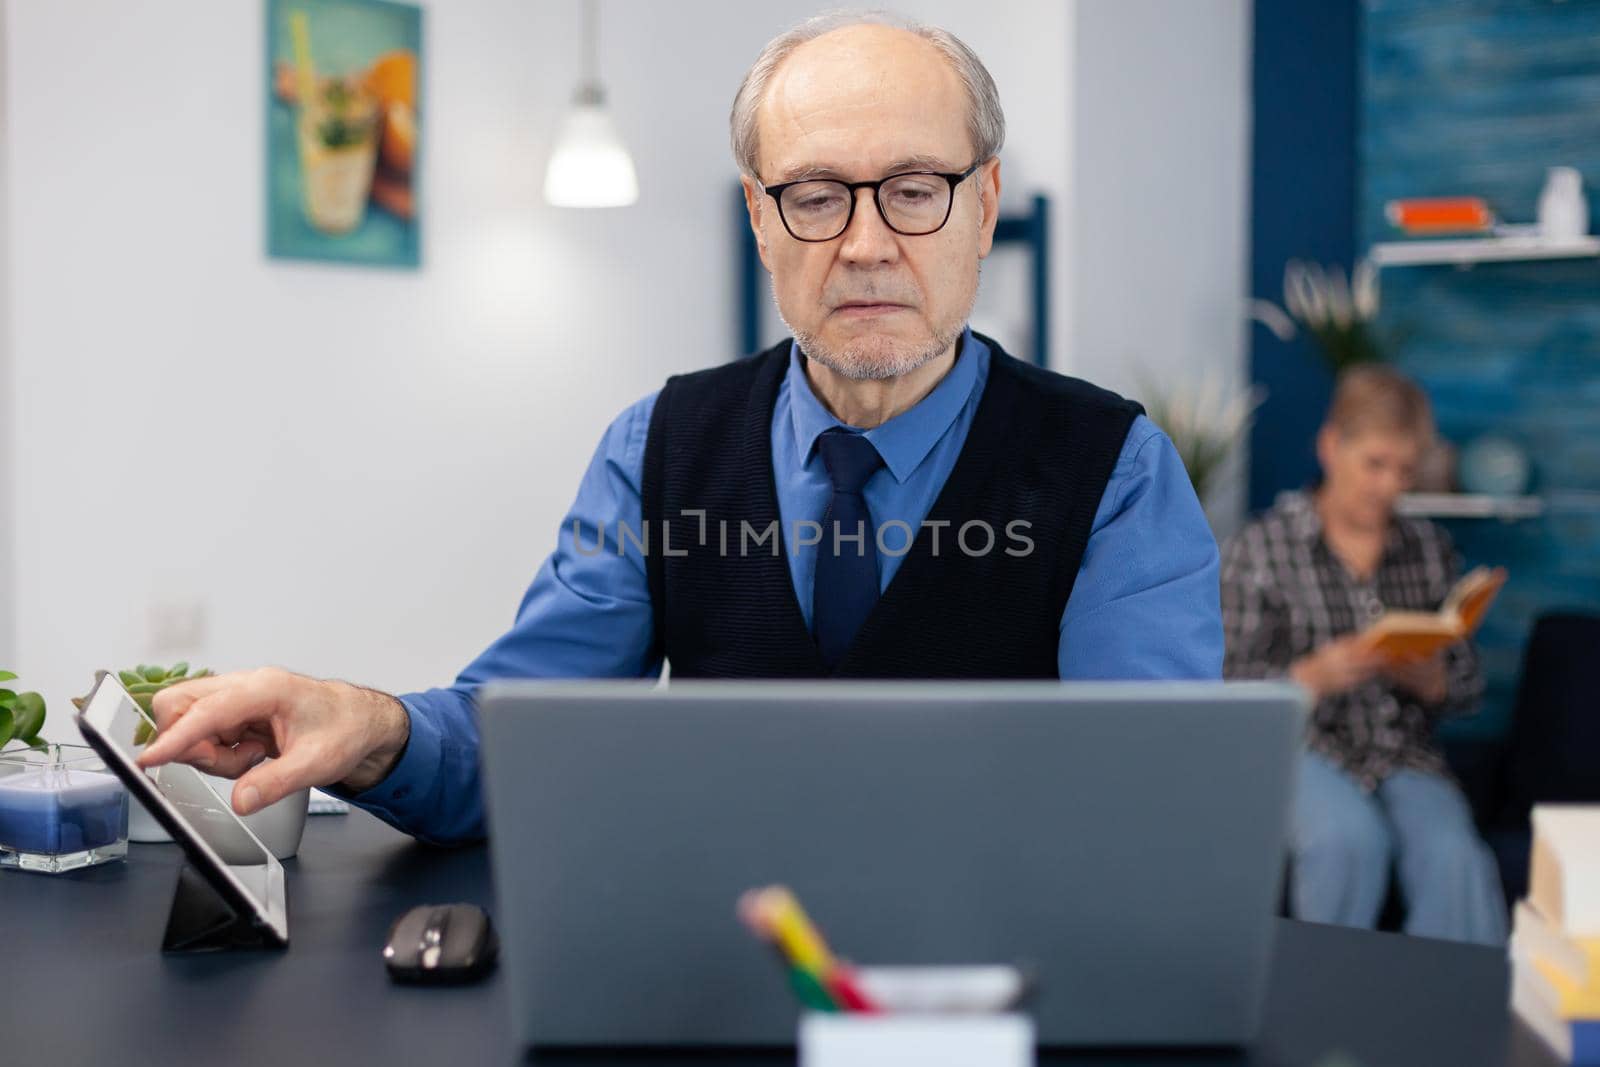 Portrait of mature man doing websurfing on laptop from home office. Elderly man entrepreneur in home workplace using portable computer sitting at desk while wife is reading a book sitting on sofa.